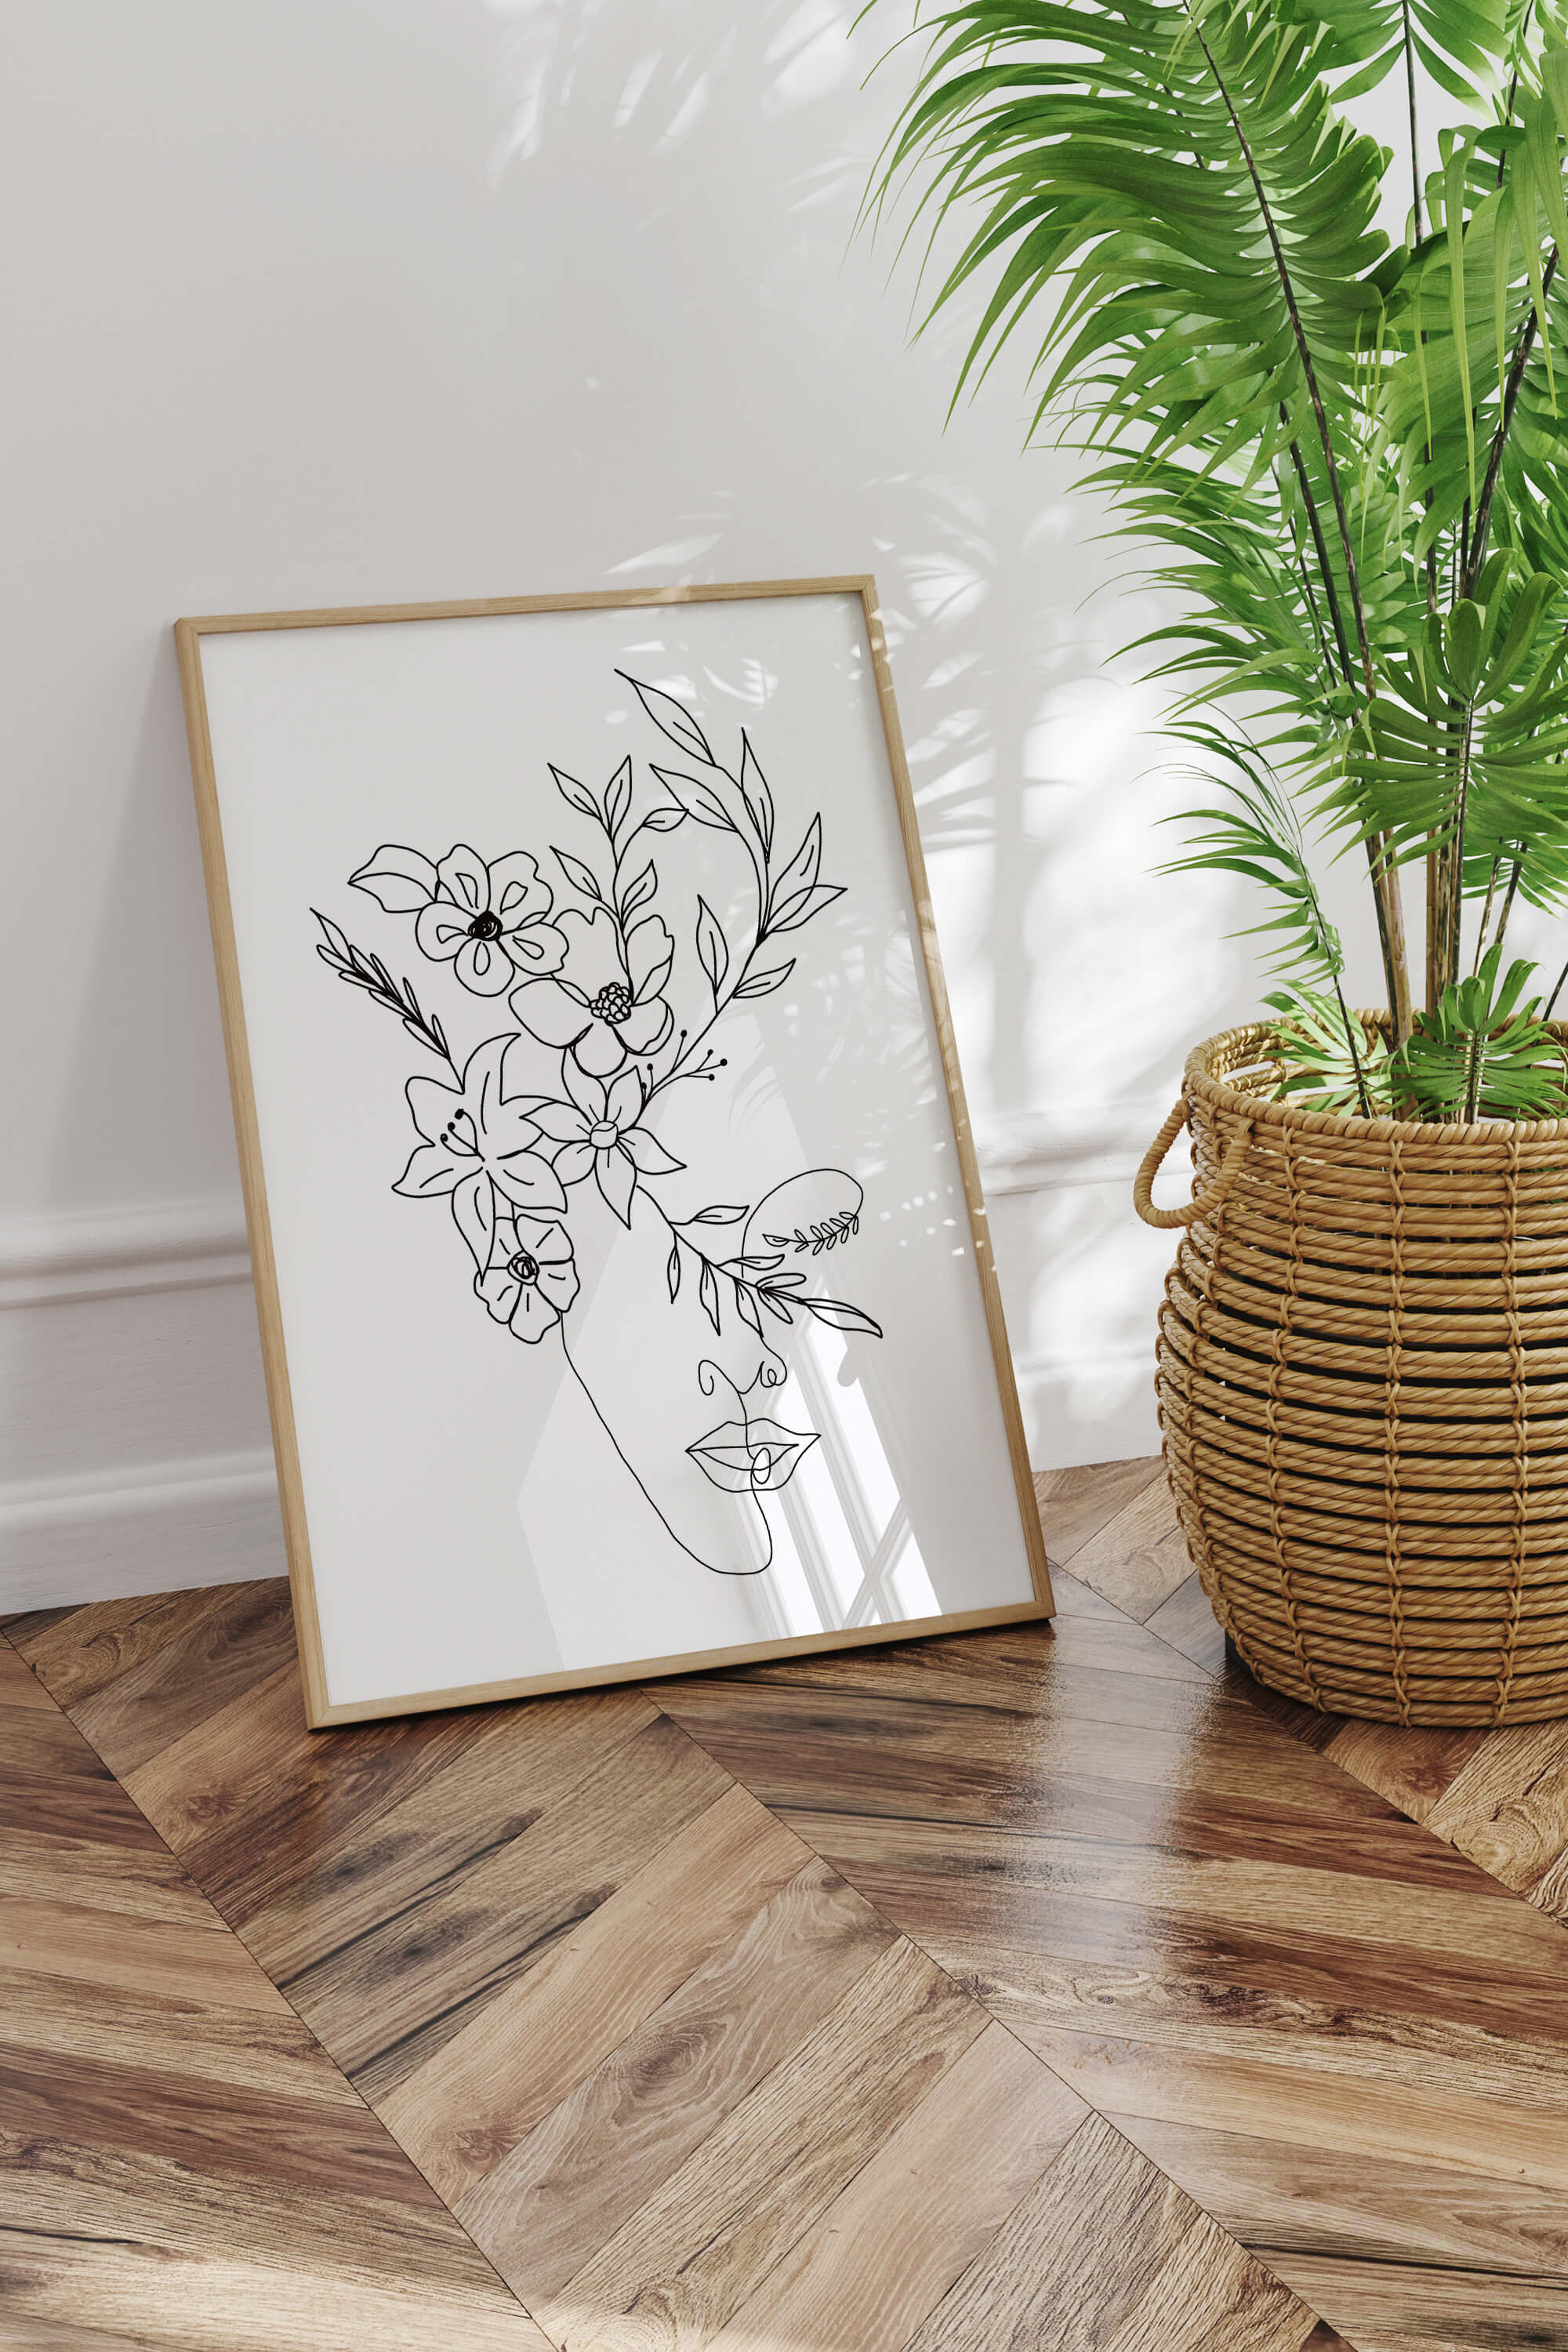 Captivating simplicity in black and white abstract floral print, bringing the charm of nature indoors. Awe-inspiring art with a focus on minimalism and beauty, perfect for those seeking an elegant addition to their collection.